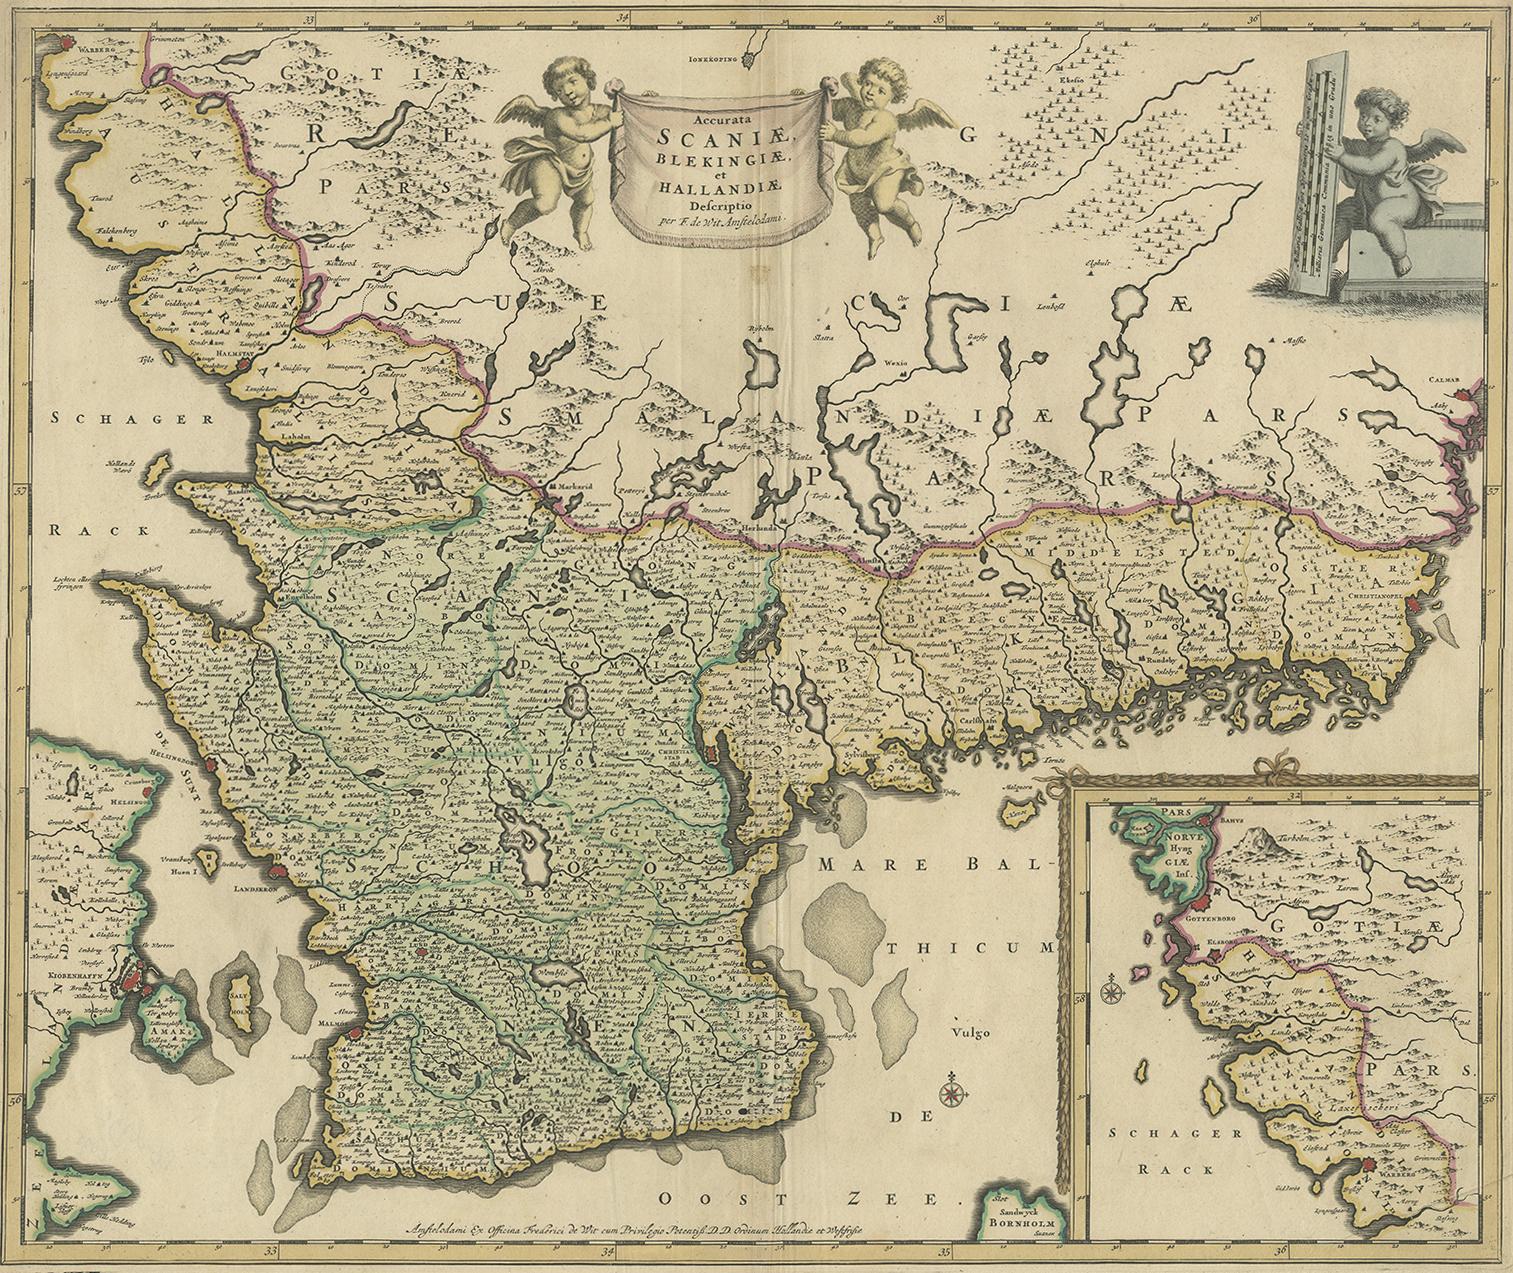 Antique map titled 'Accurata Scaniae, Blekingae et Hallandiae Descriptio per F. de Wit Amstelodami'. This map shows South Sweden with an inset of Halmstad and vicinity. Contemporary coloring.